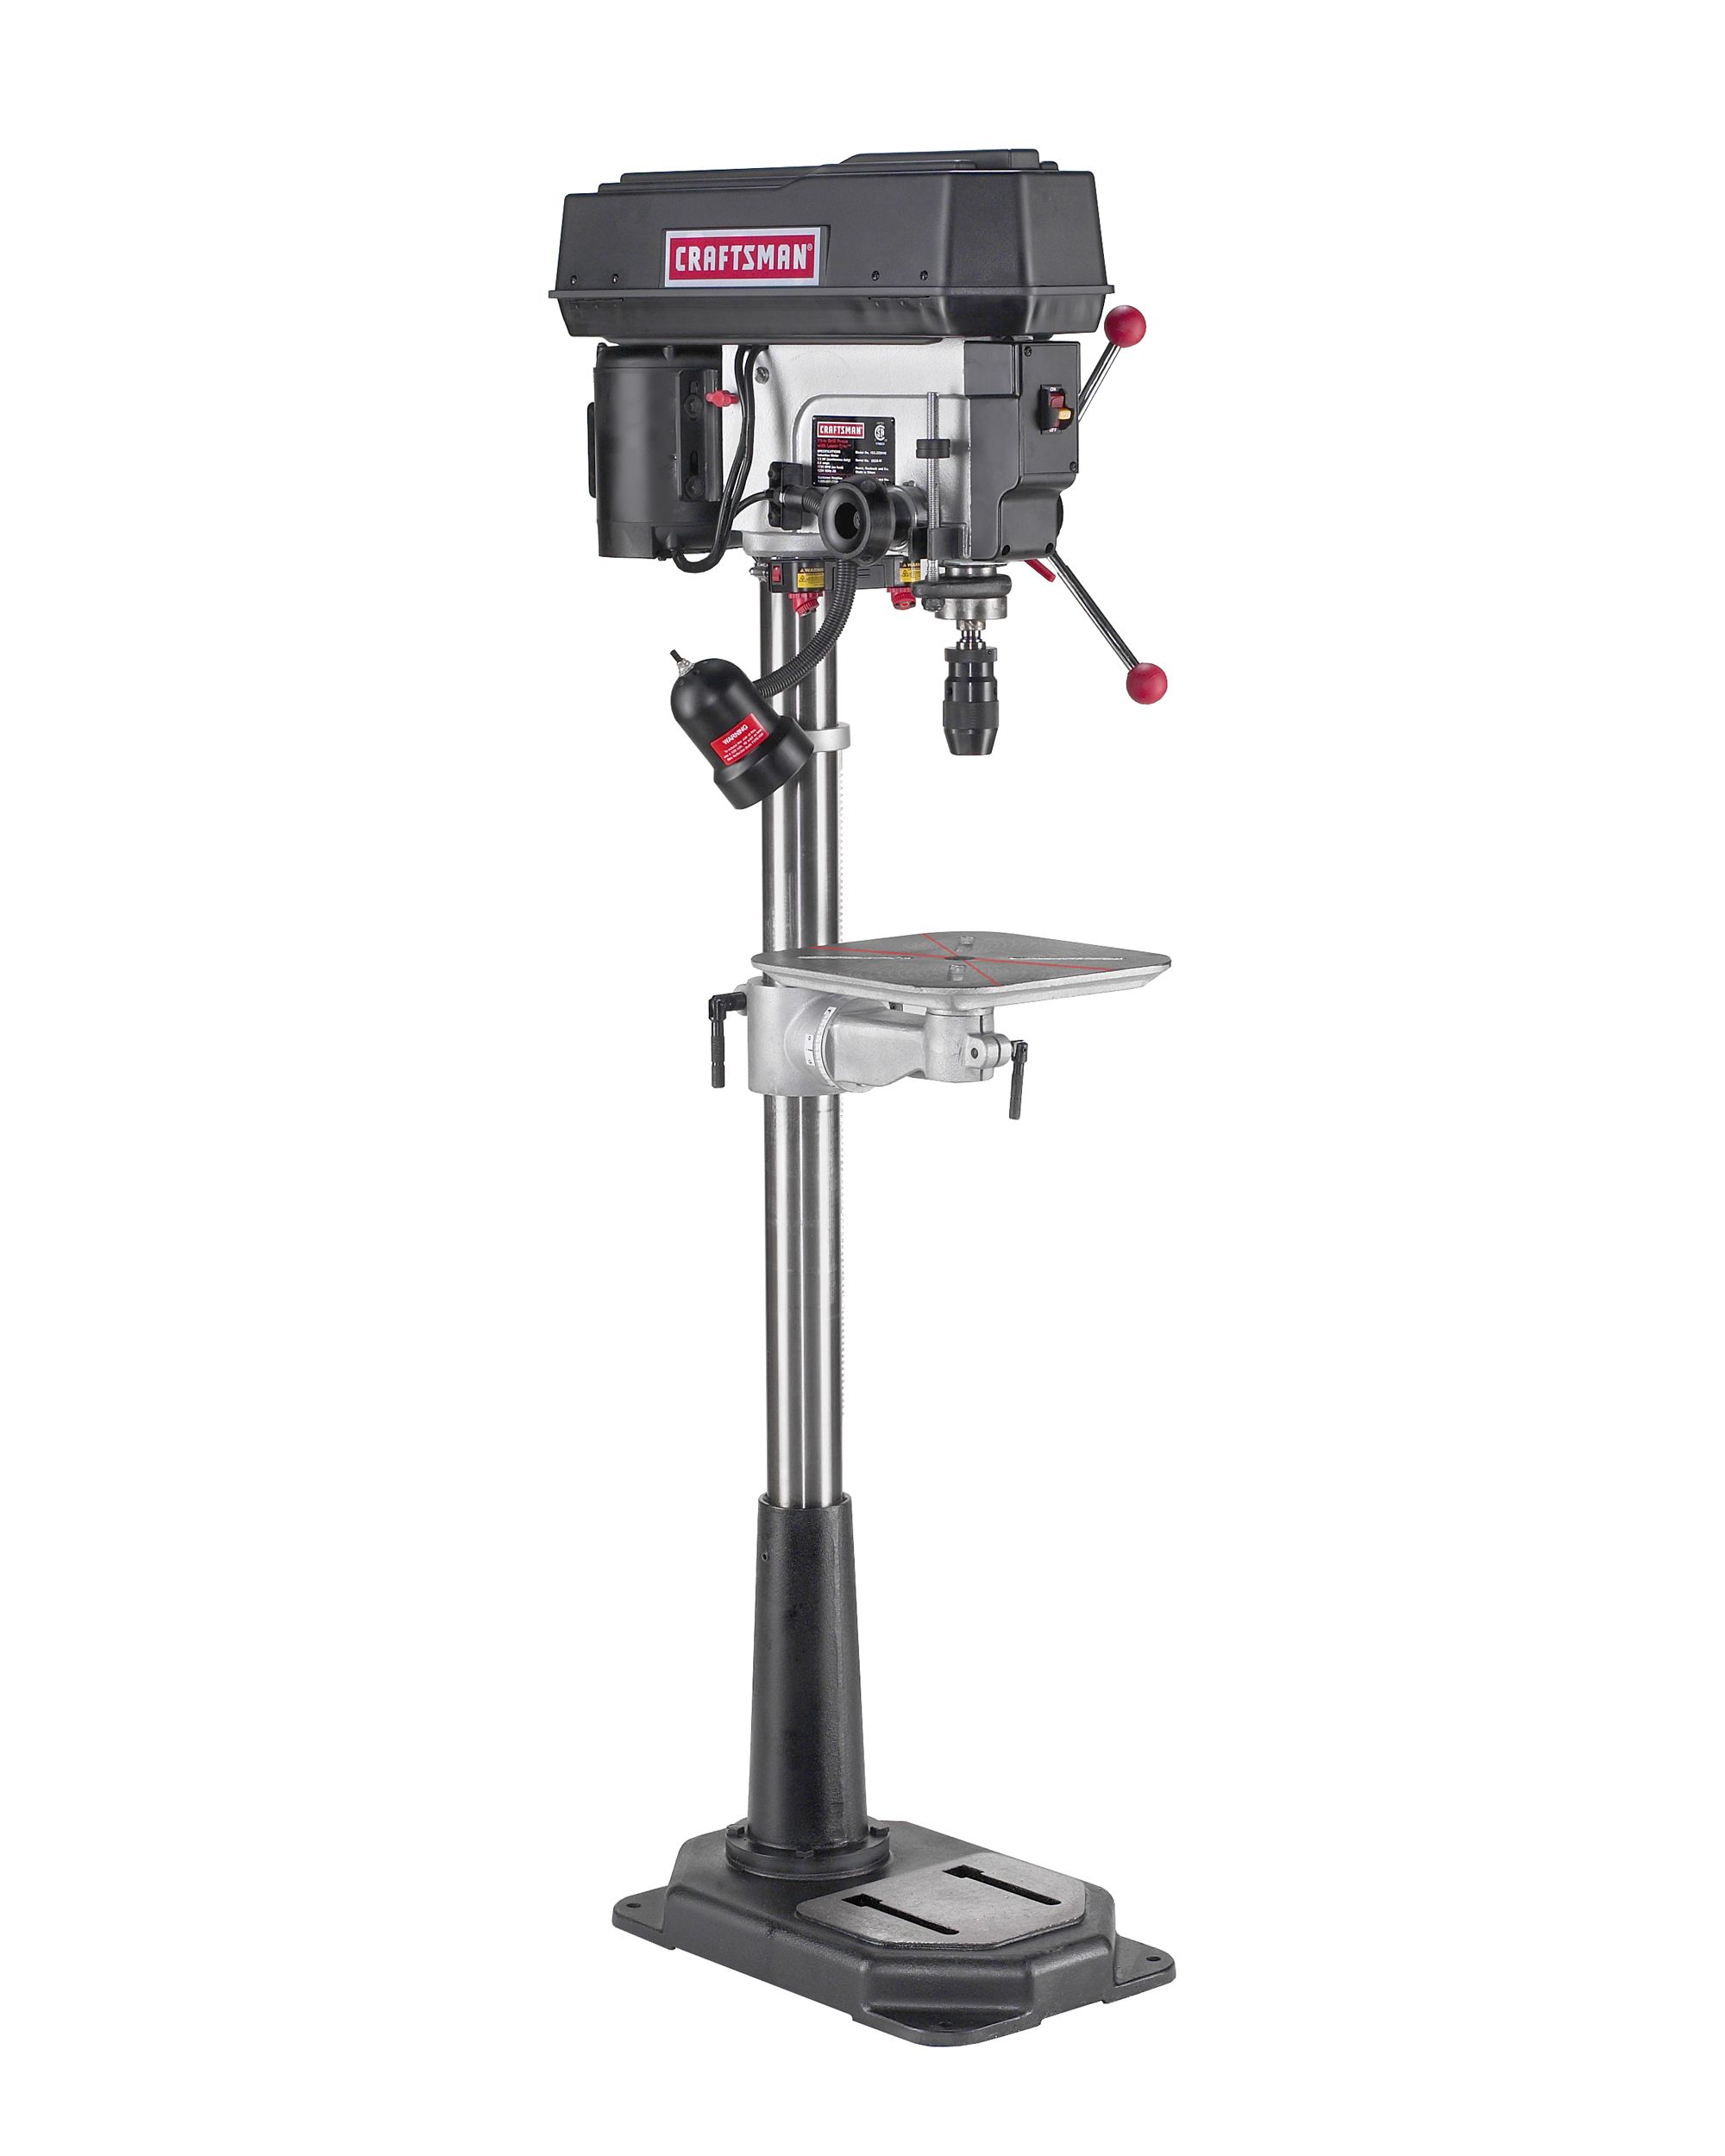 Craftsman 1/2 HP 15” Drill Press: Power Up With Deals at Sears